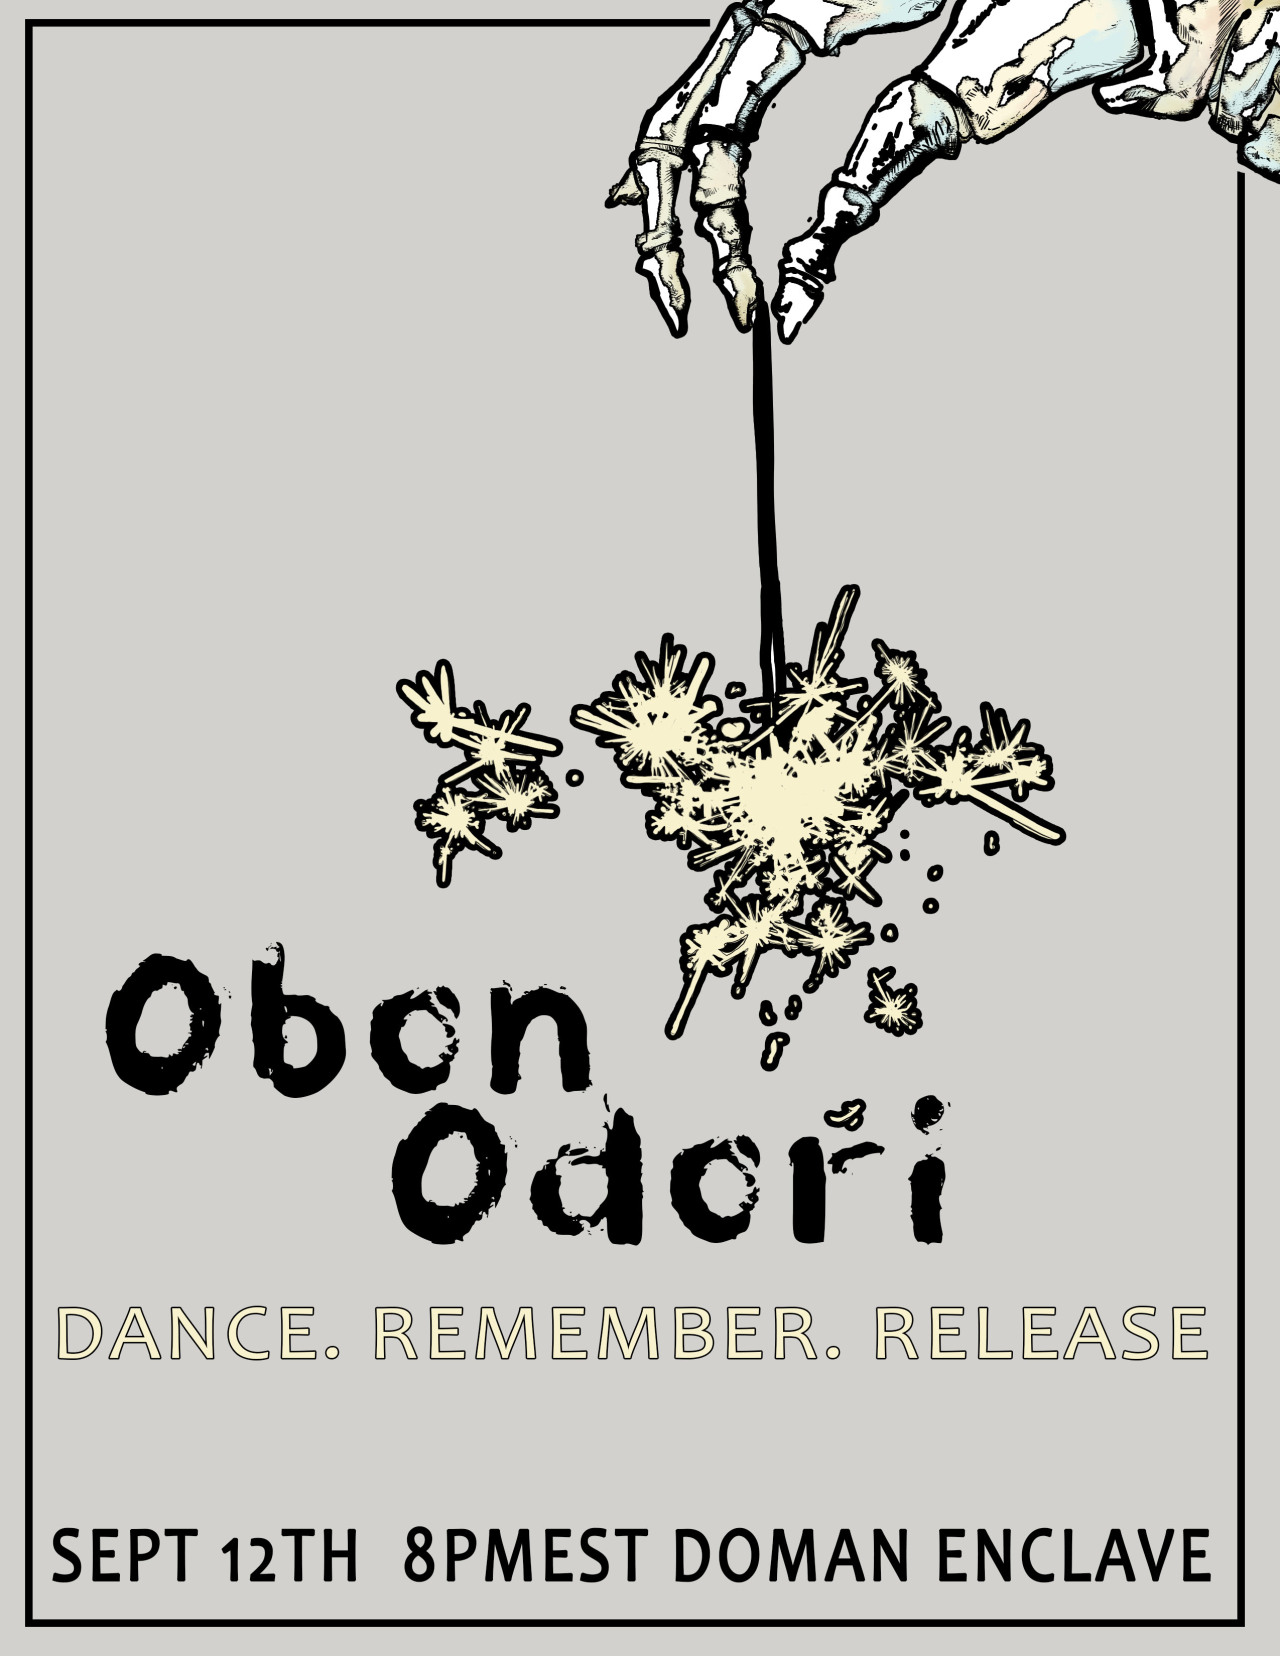 [Balmung] Obon Odori
September 12th @ 8PM EST
Doman EnclavePray to the spirits, honor the dead. Obon is a traditional Eastern festival where families and community come together to visit, to remember, and to release their beloved ancestors. The Obon...